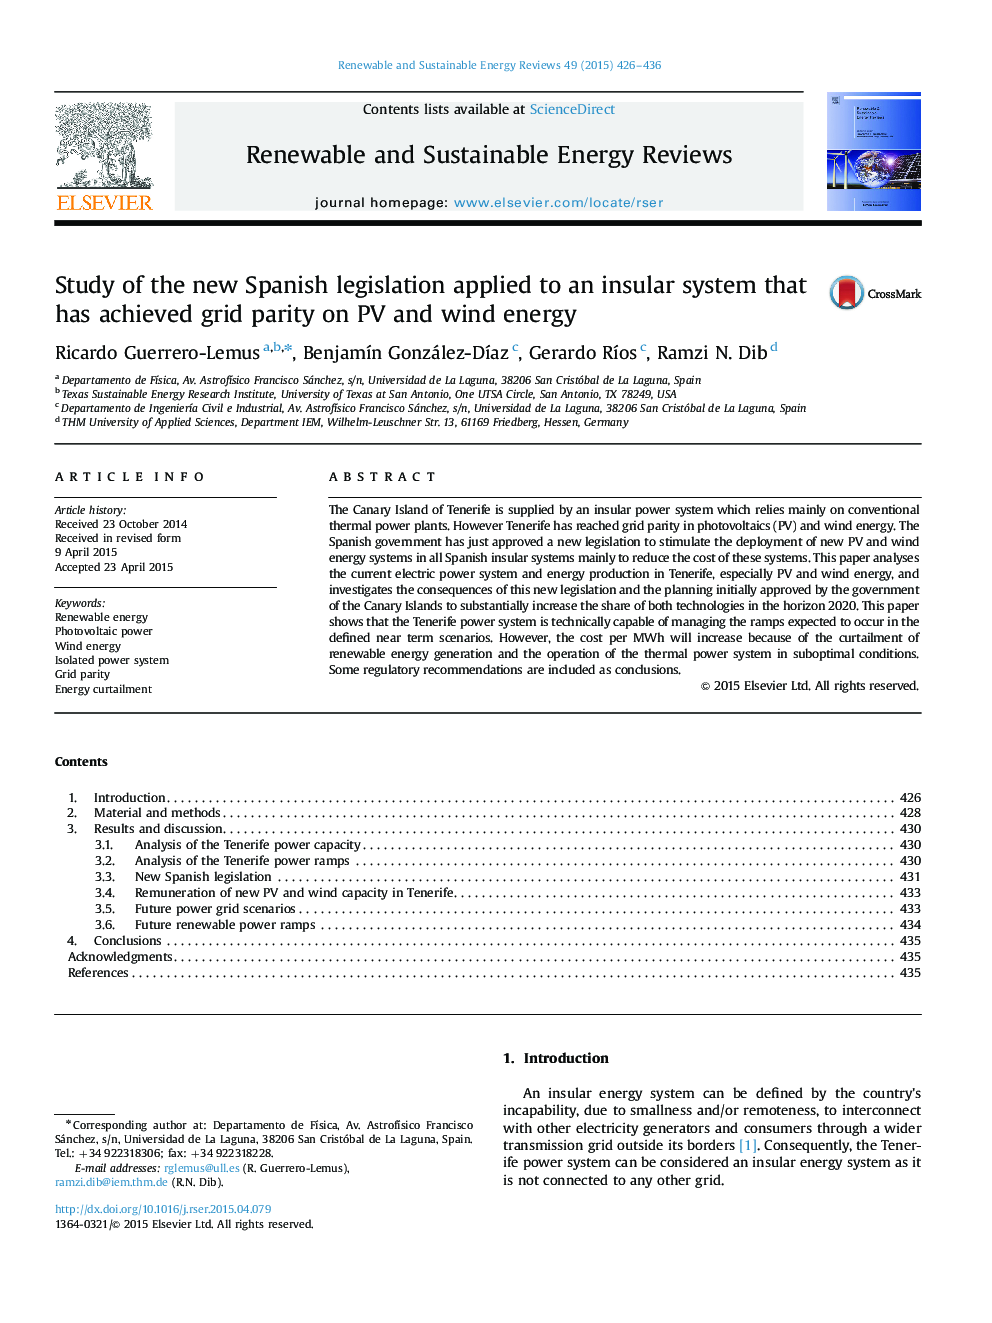 Study of the new Spanish legislation applied to an insular system that has achieved grid parity on PV and wind energy